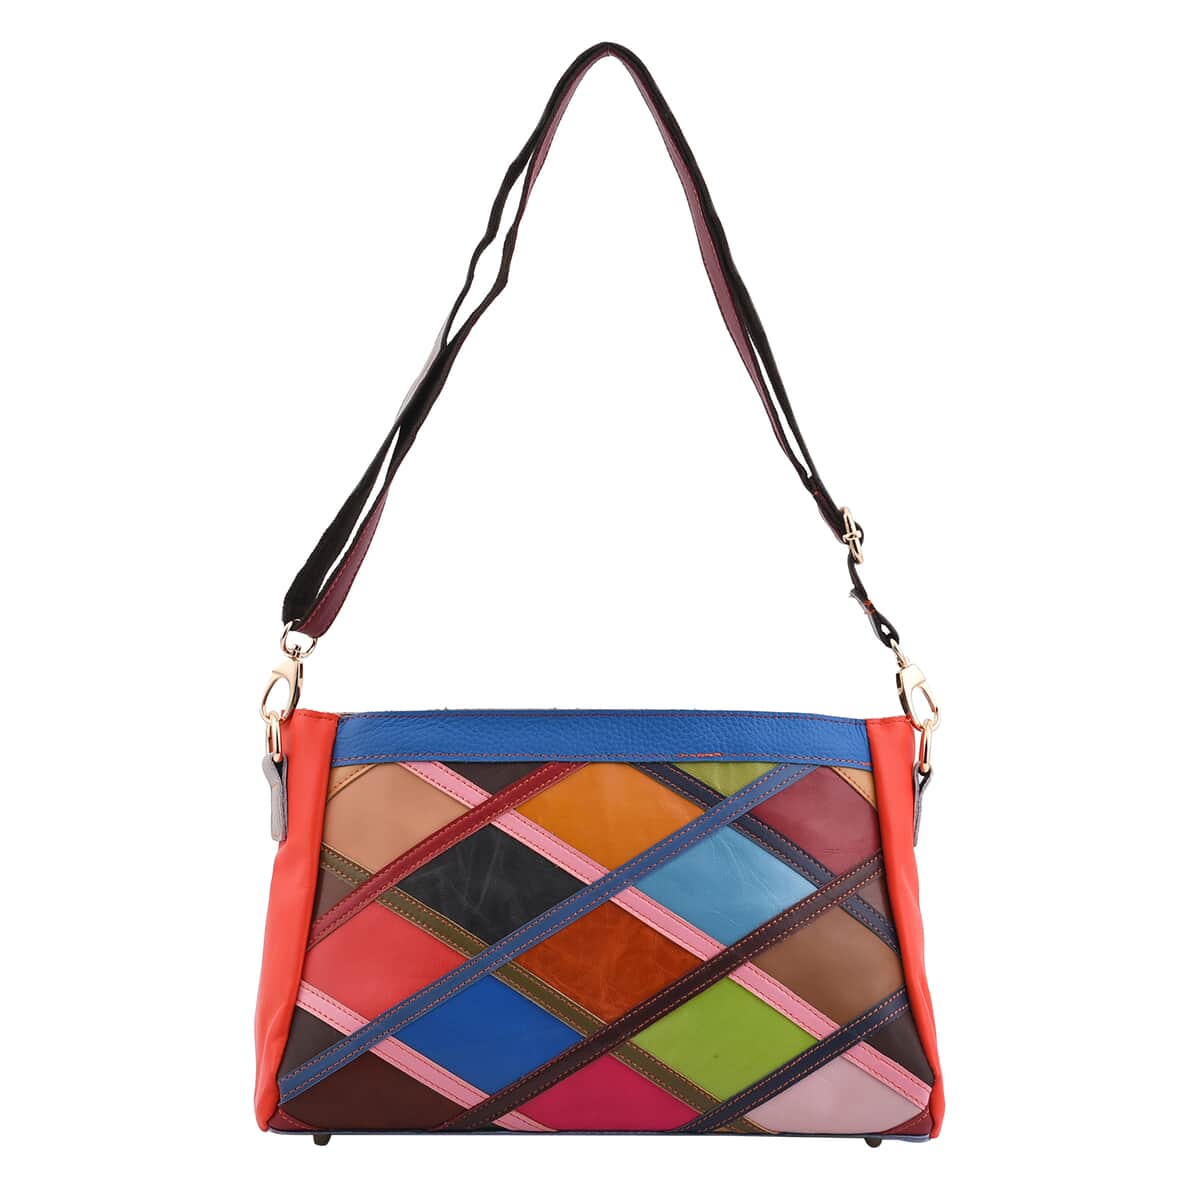 CHAOS BY ELSIE Rainbow Color Mosaic Pattern Genuine Leather Crossbody Bag (12.6"x4.72"x7.48") with Detachable Shoulder Strap image number 0